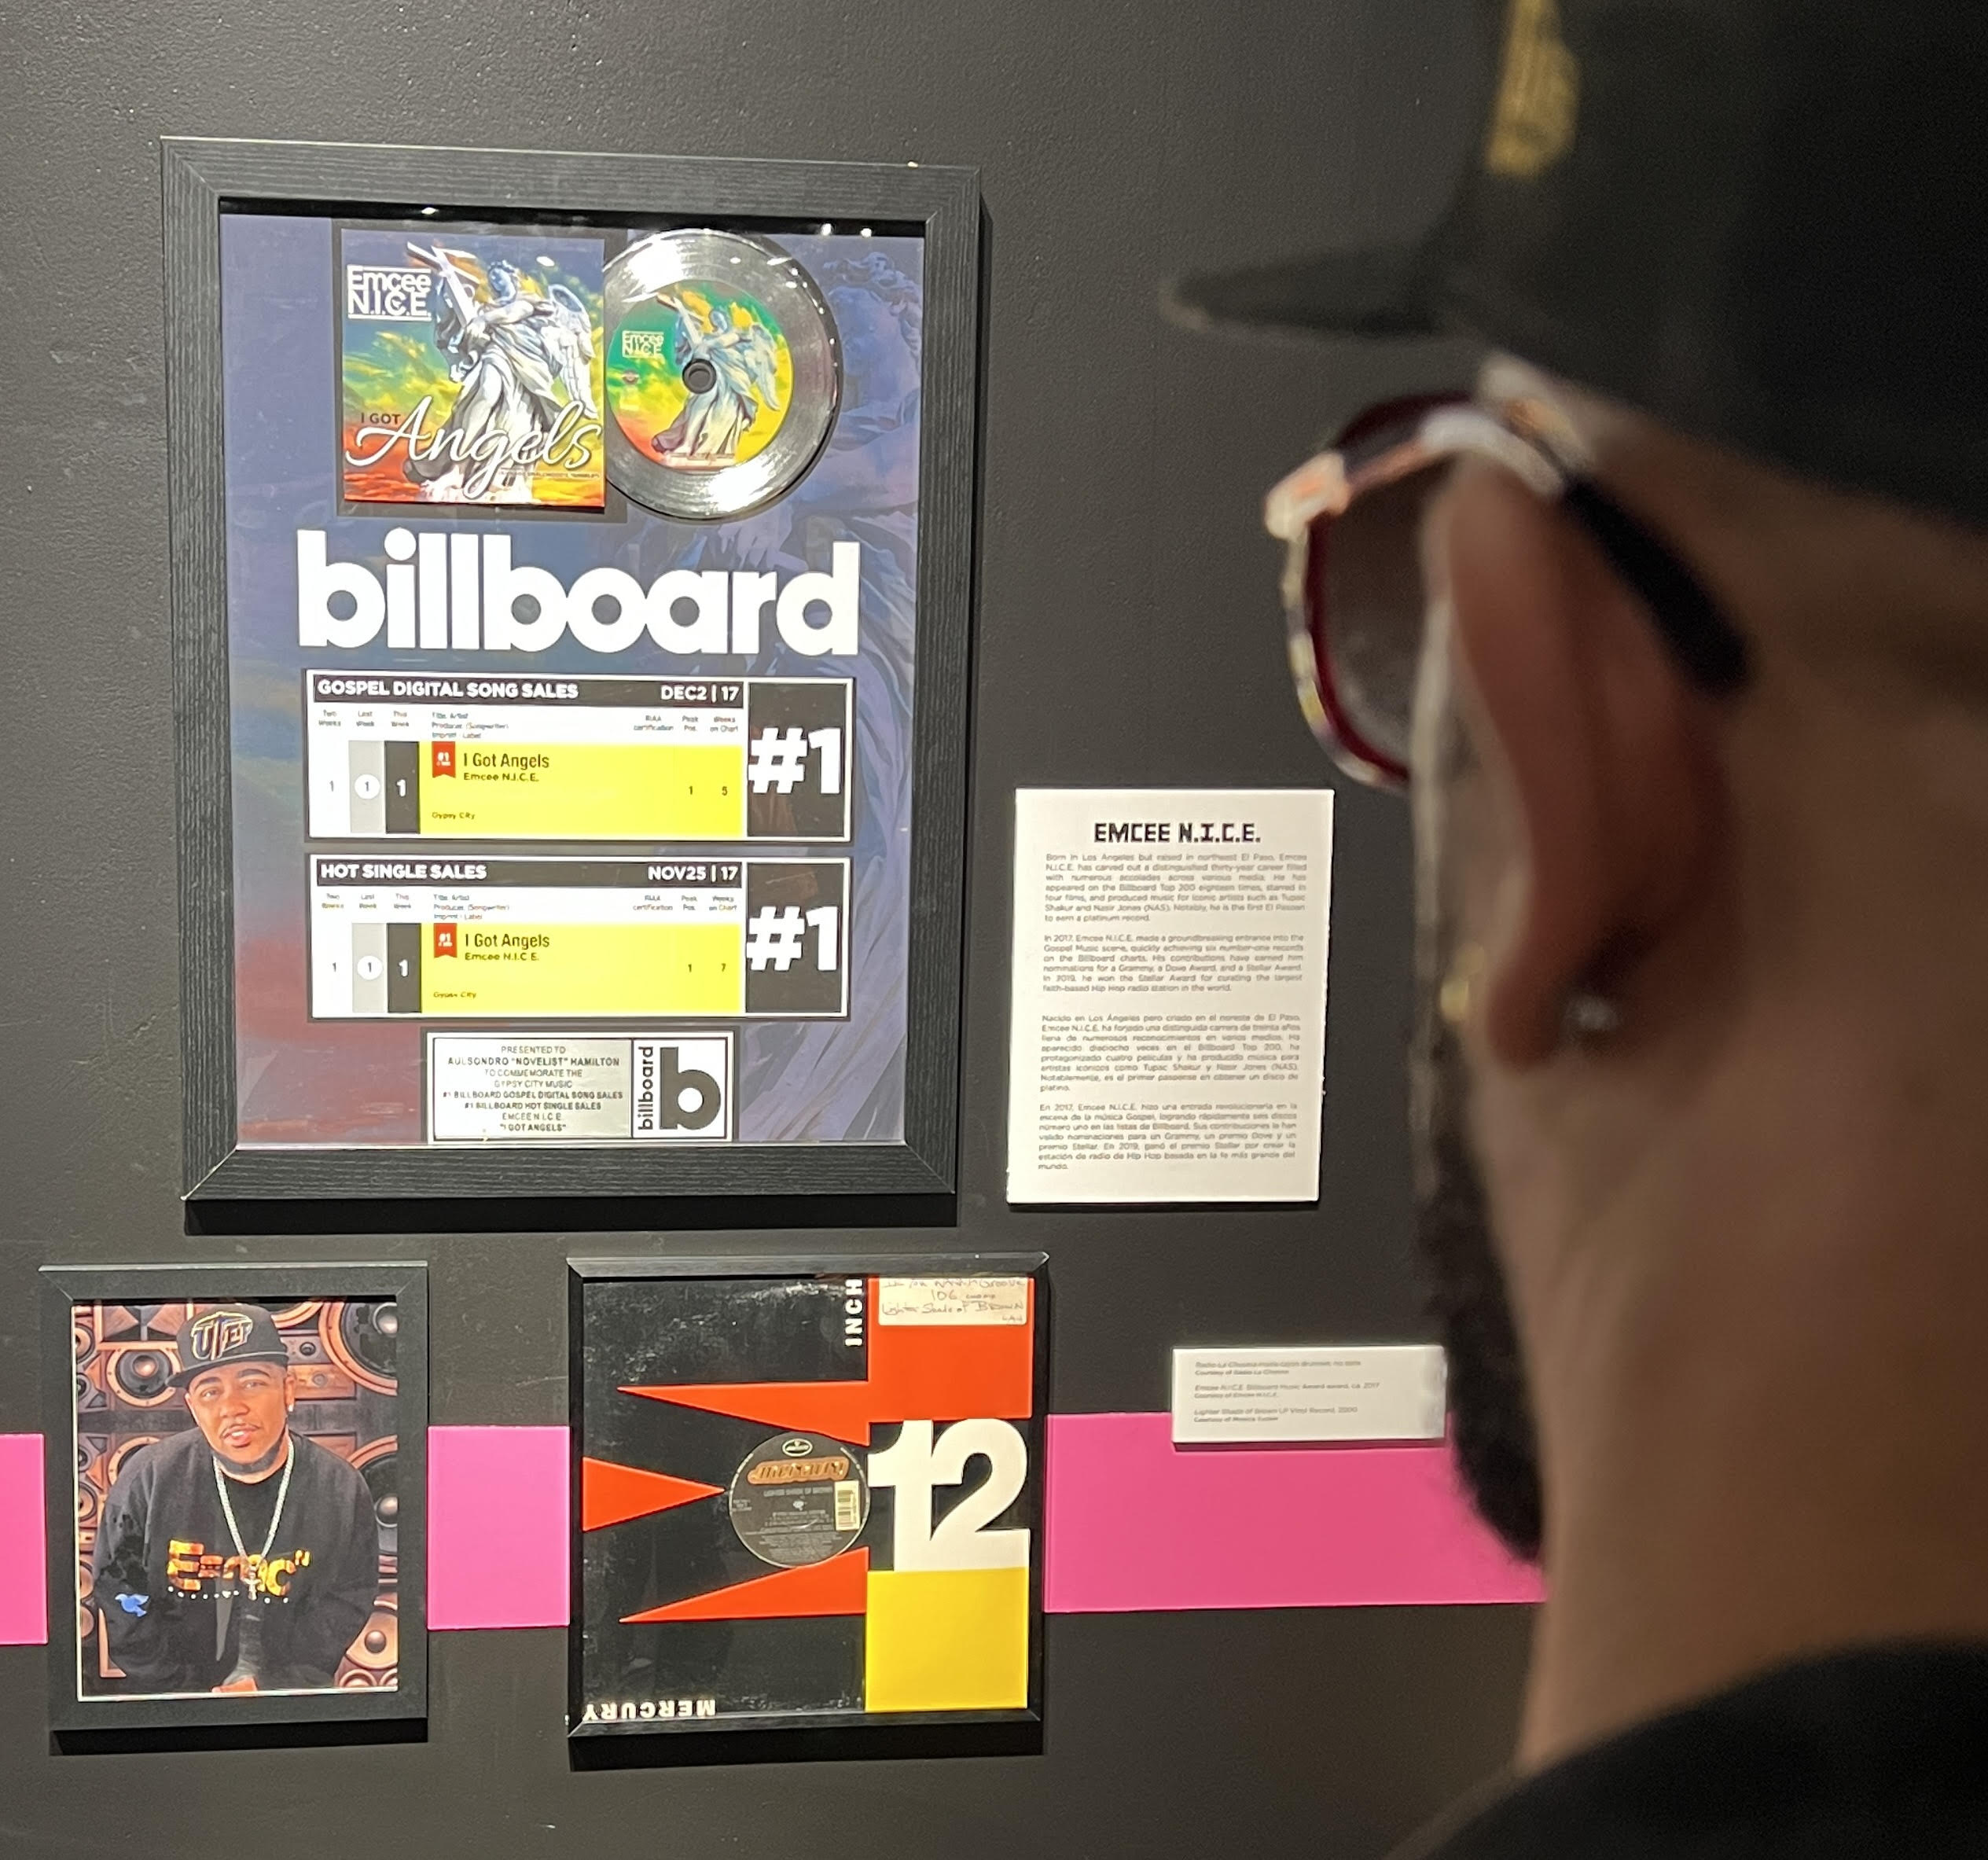 Chart Topping Hits and Borderland Roots, Hip Hop Legend Emcee N.I.C.E. Honored in El Paso Museum of History Exhibition